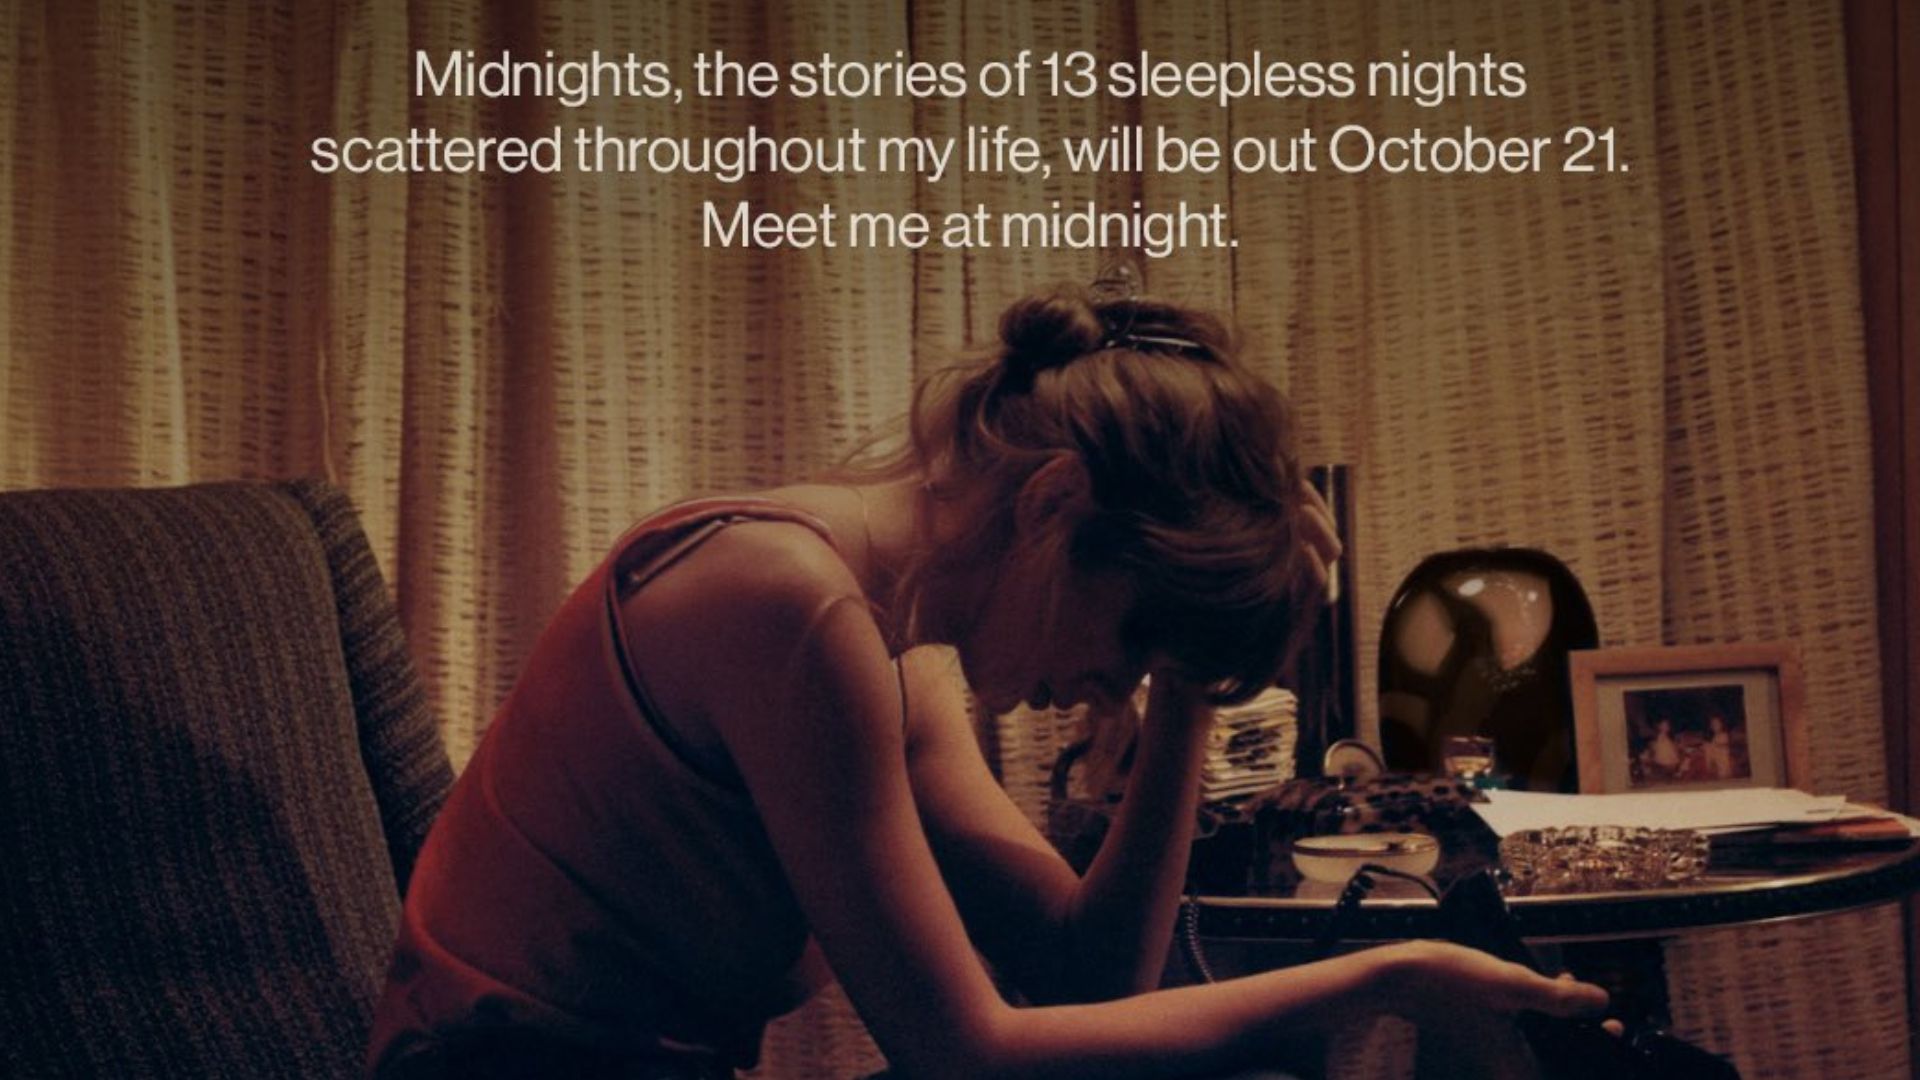 Taylor Swift Announces Brand New Album Midnights at the VMAS